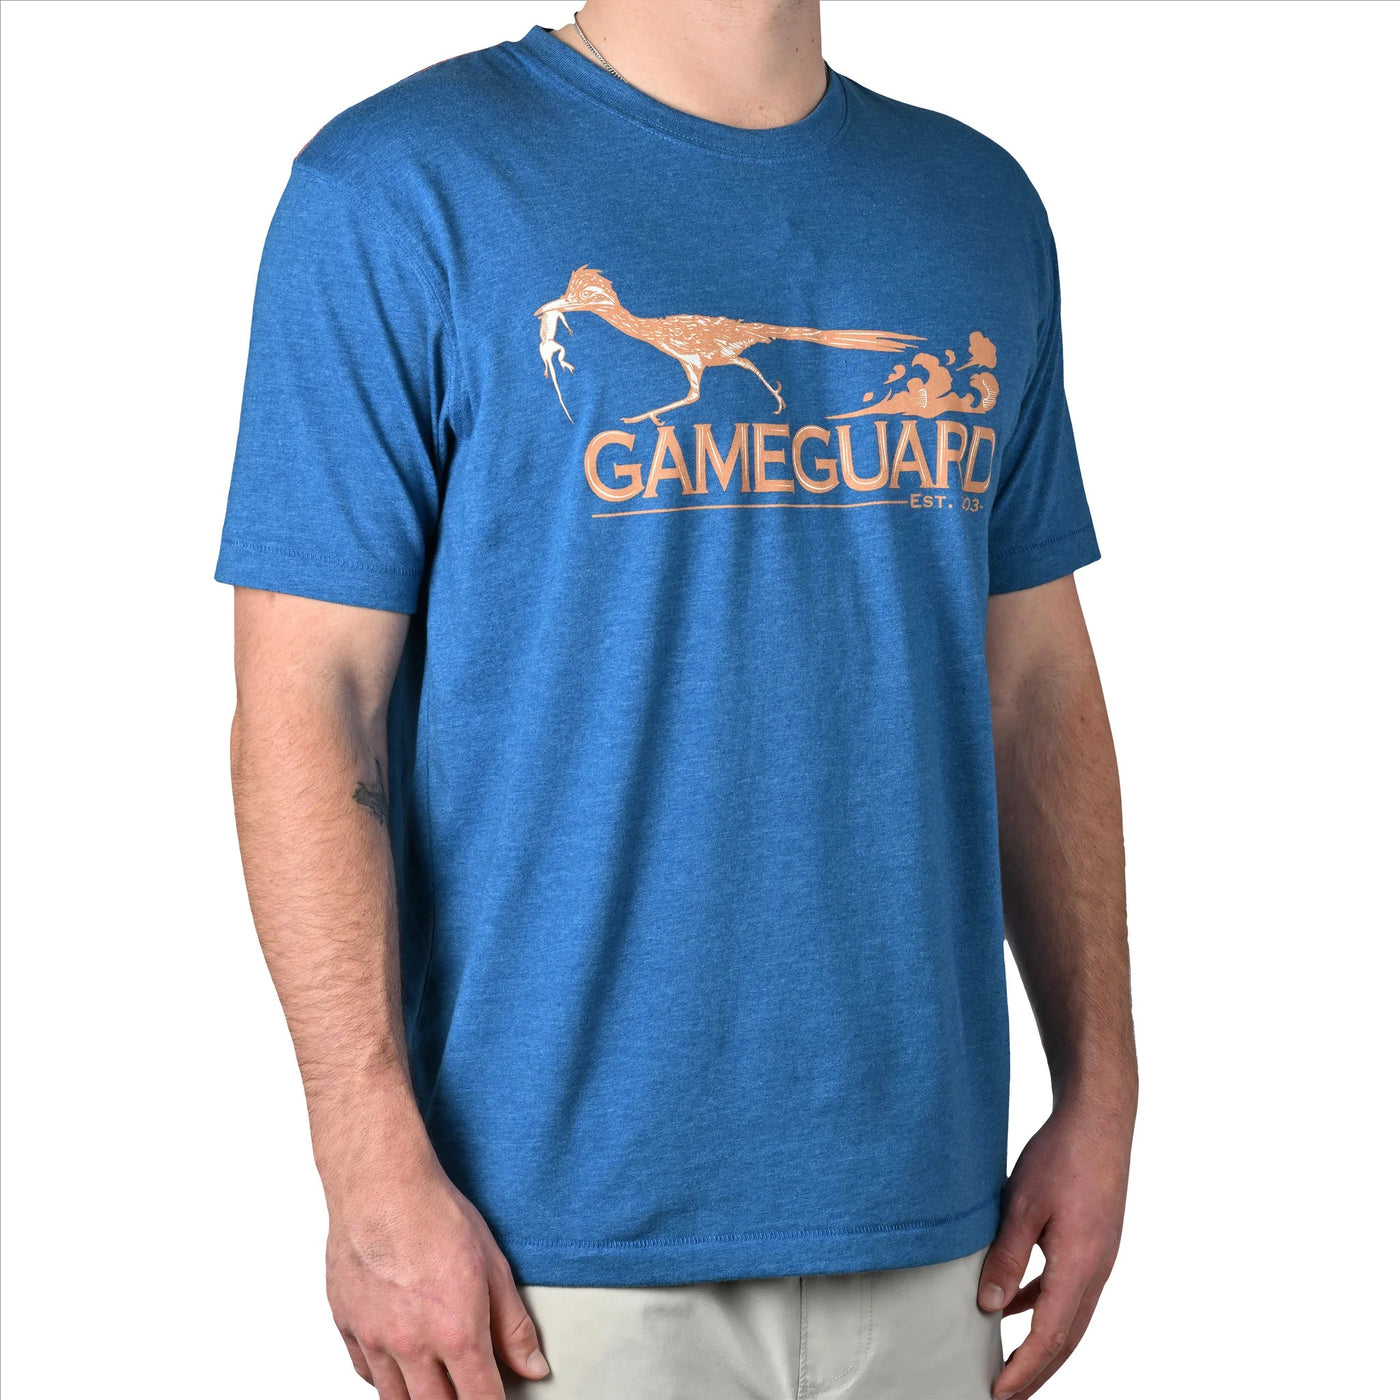 GameGuard HydroBlue Graphic Tee